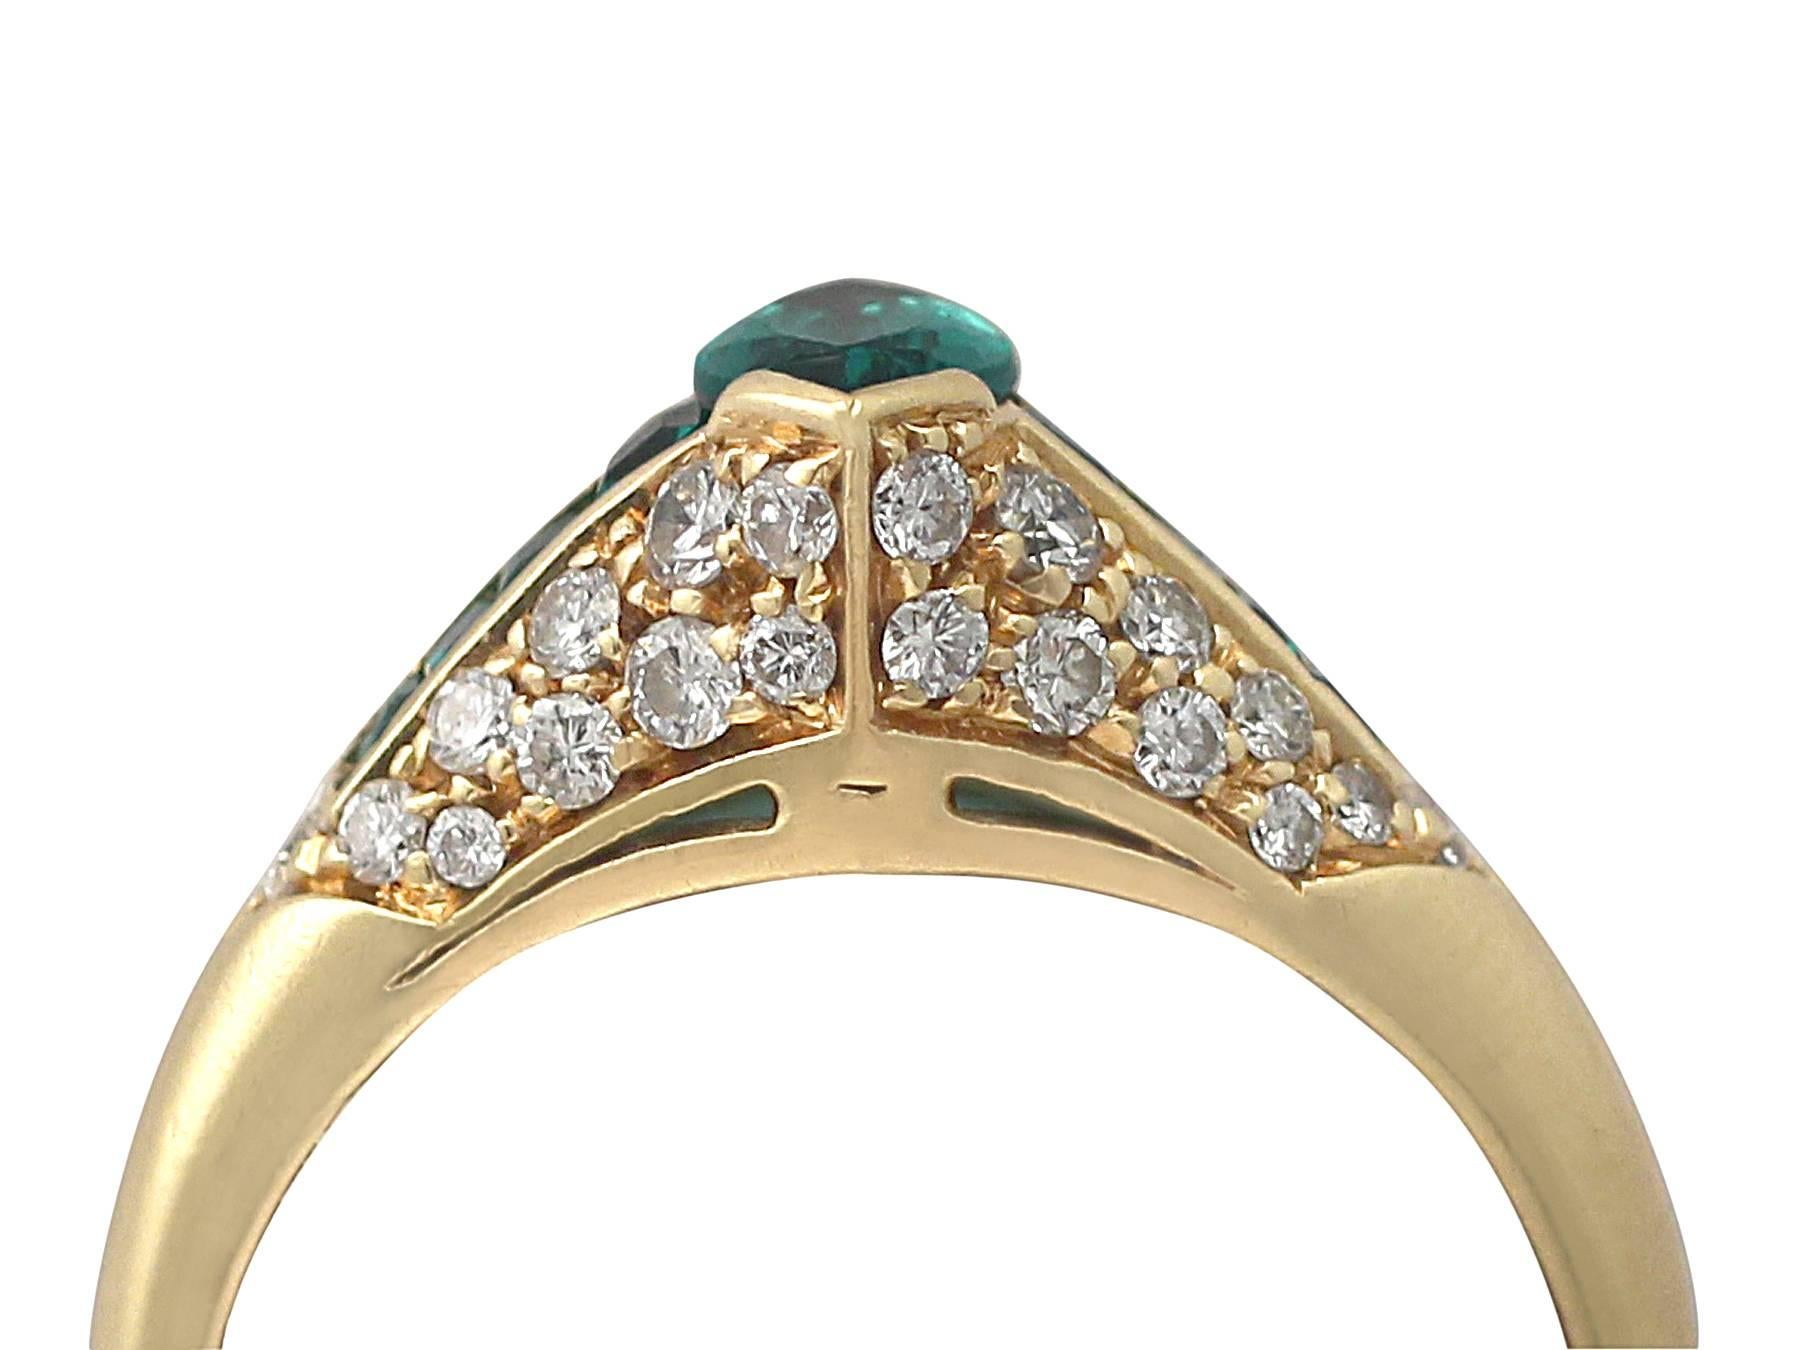 A stunning, fine and impressive vintage 0.75 carat natural emerald and 0.59 carat diamond, 18 karat yellow gold dress ring; part of our diverse vintage jewelry and estate jewelry collections

This stunning, fine and impressive emerald and diamond